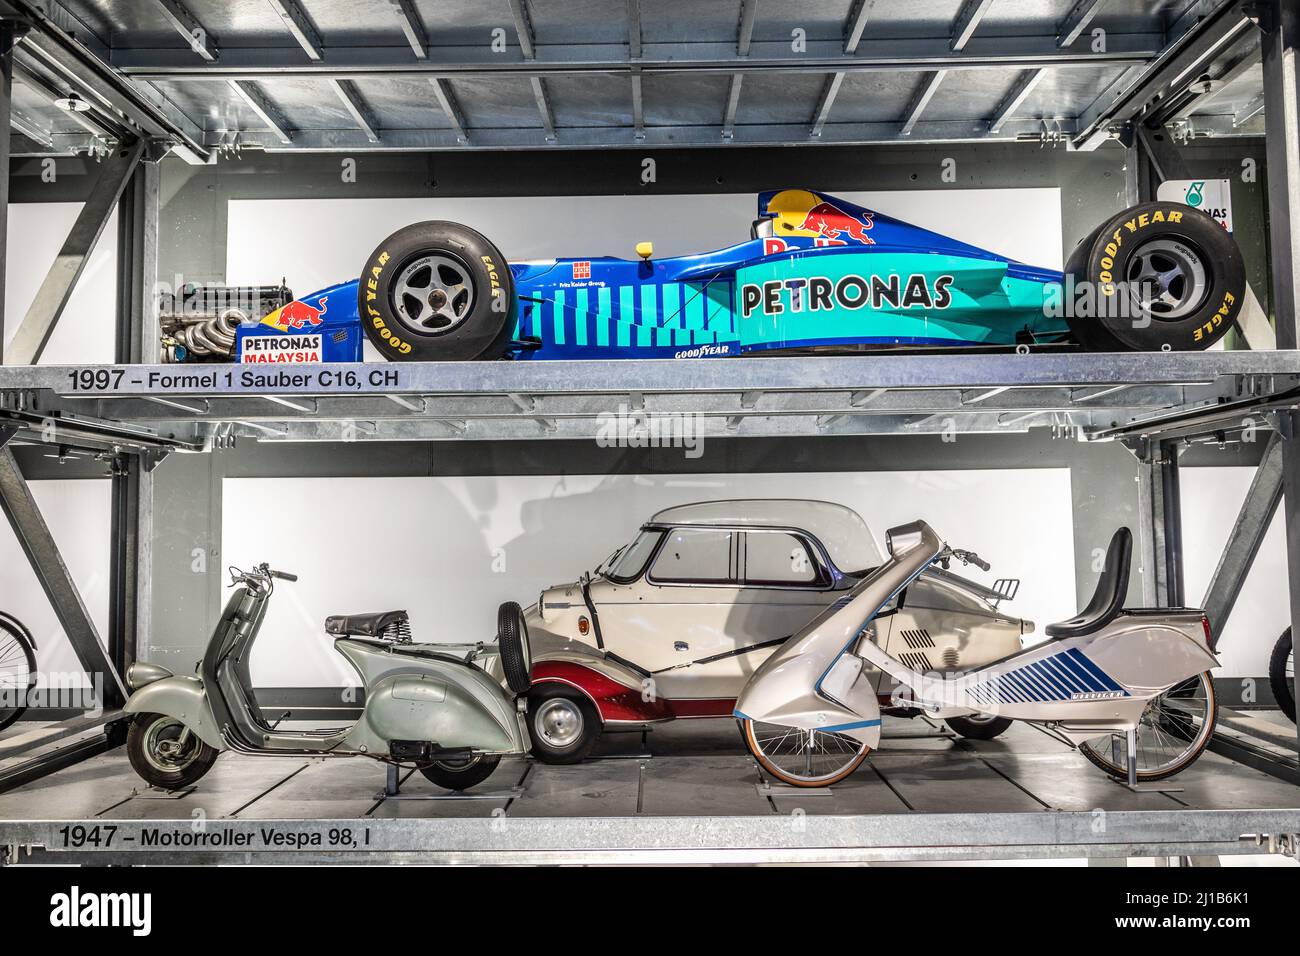 FORMULE 1 C16 USED BY THE SAUBER PETRONAS TEAM AND COLLECTION OF OLD CARS AT THE SWISS MUSEUM OF TRANSPORT, PAVILION DEDICATED TO THE HISTORY OF THE TRAIN, VERKEHRSHAUS DES SCHWEIZ, LUCERNE, CANTON OF LUCERNE, SWITZERLAND Stock Photo